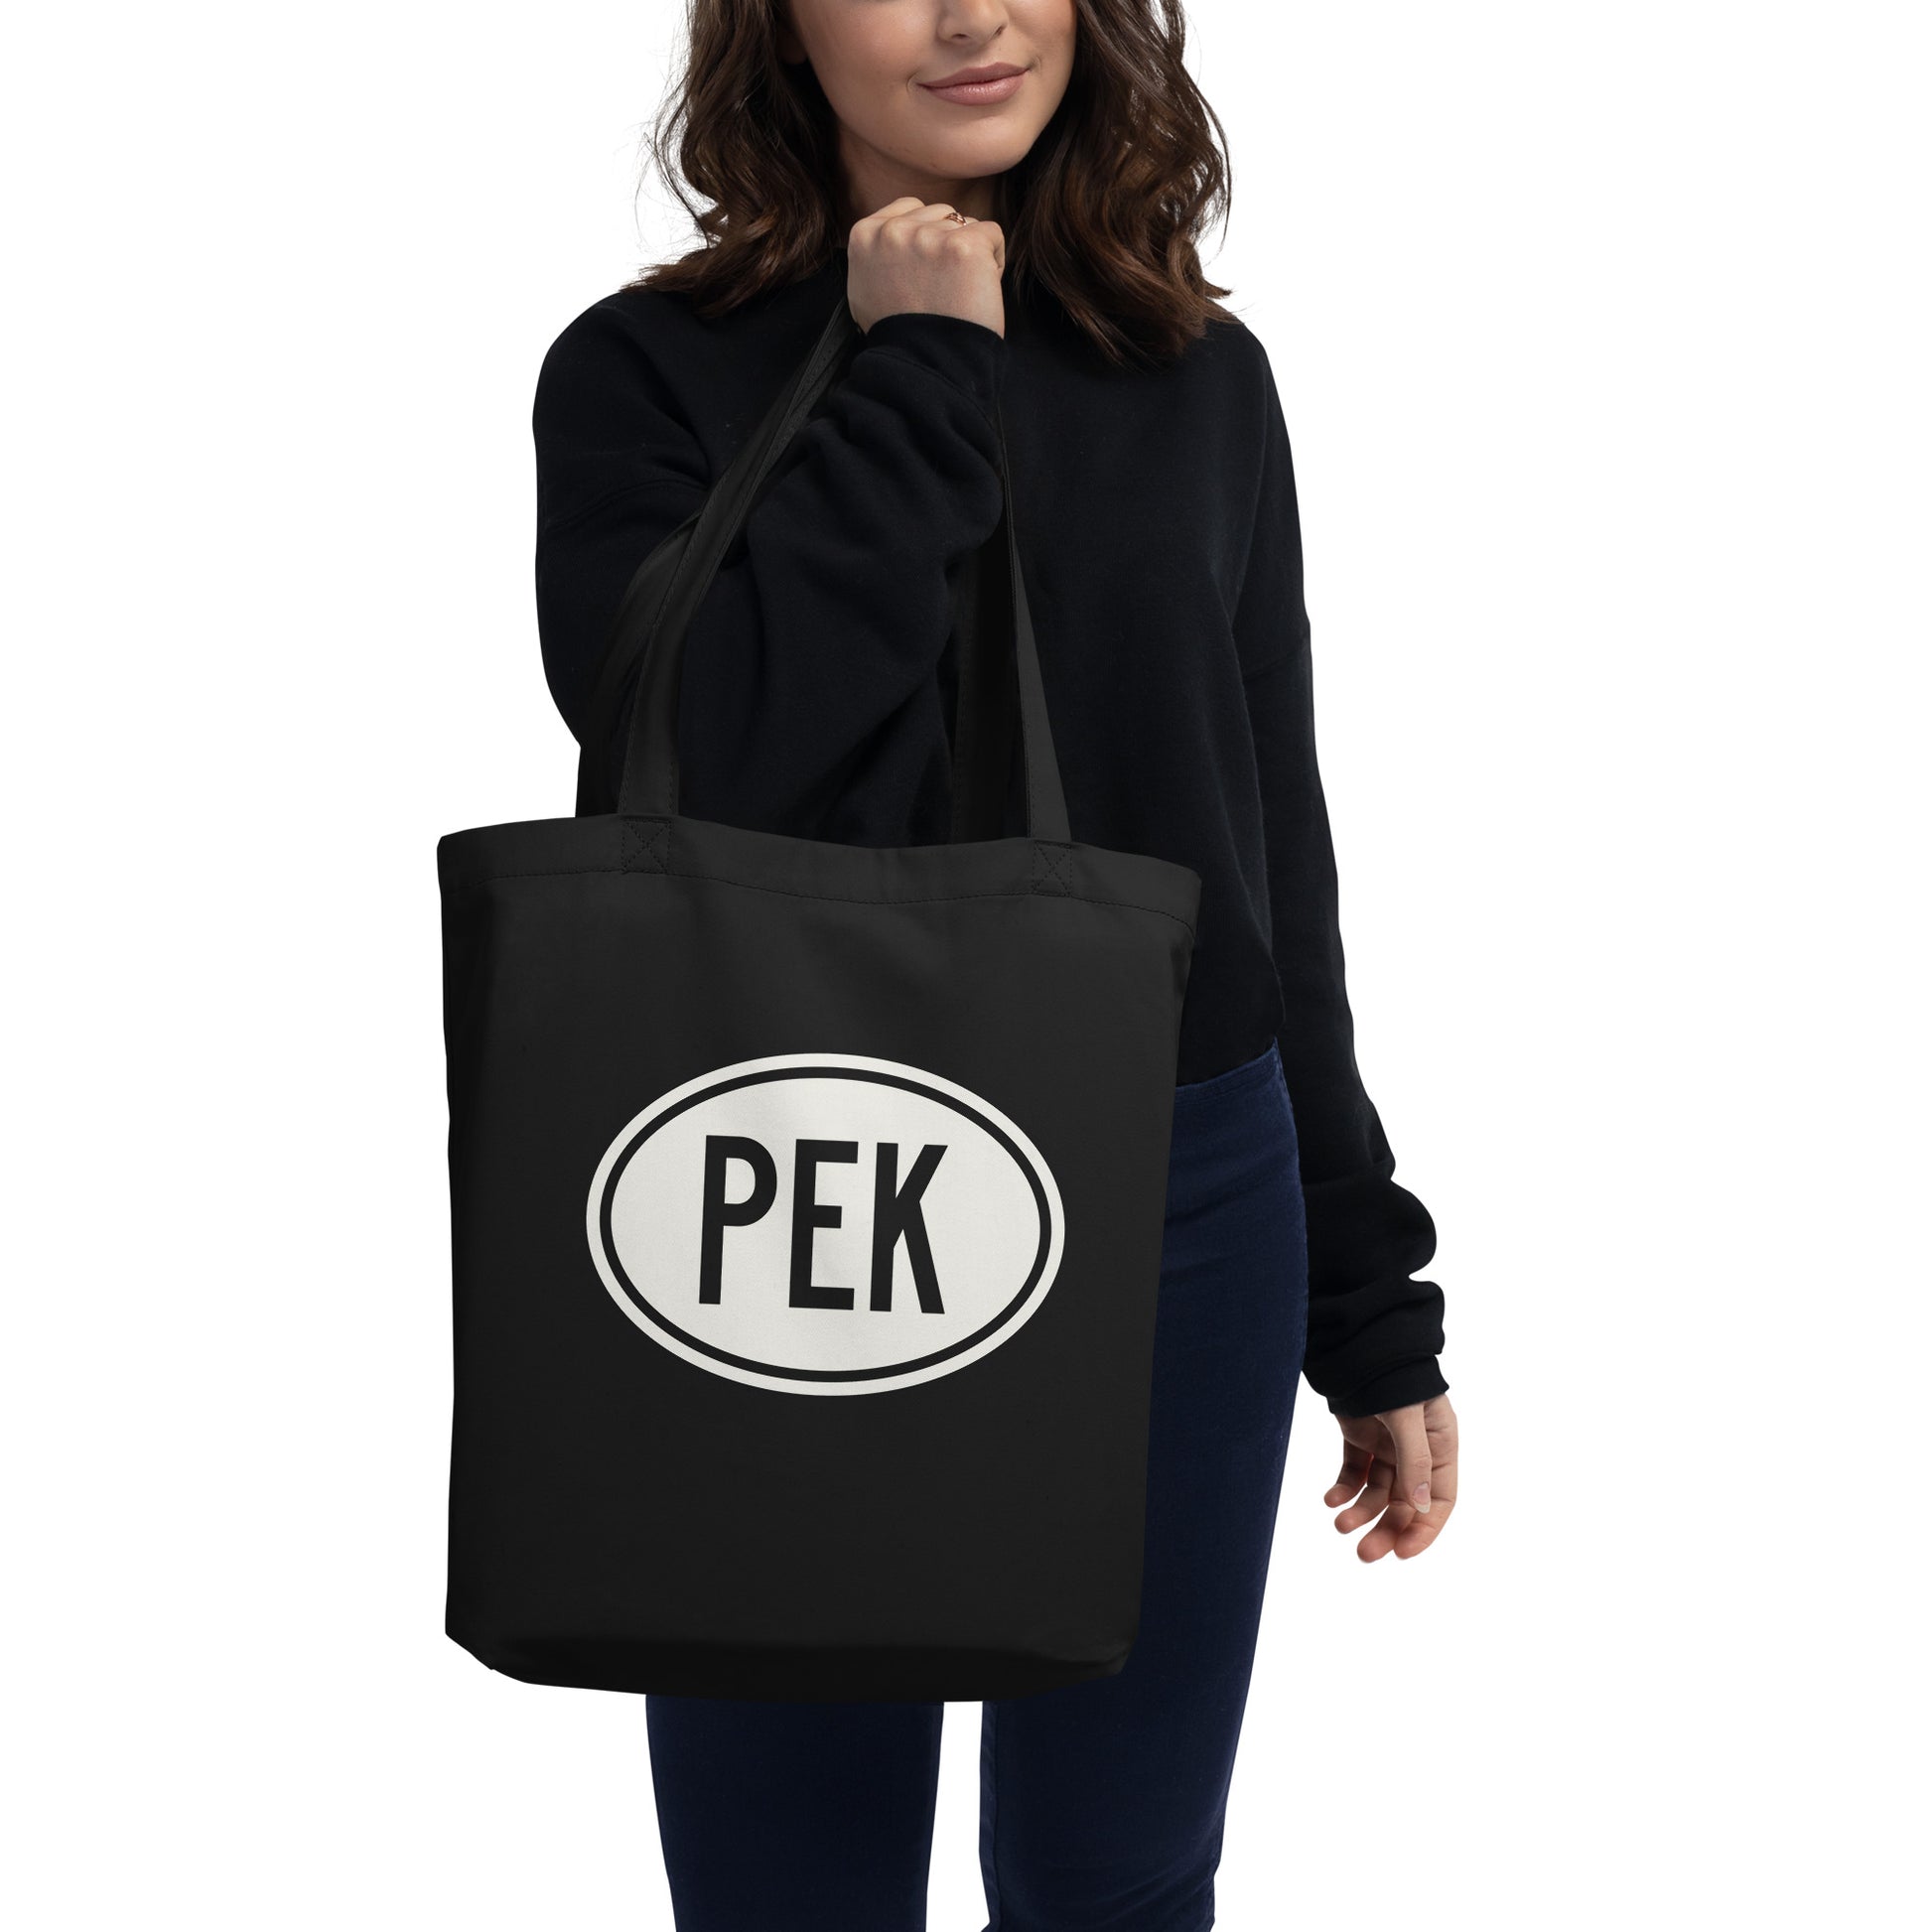 Unique Travel Gift Organic Tote - White Oval • PEK Beijing • YHM Designs - Image 03